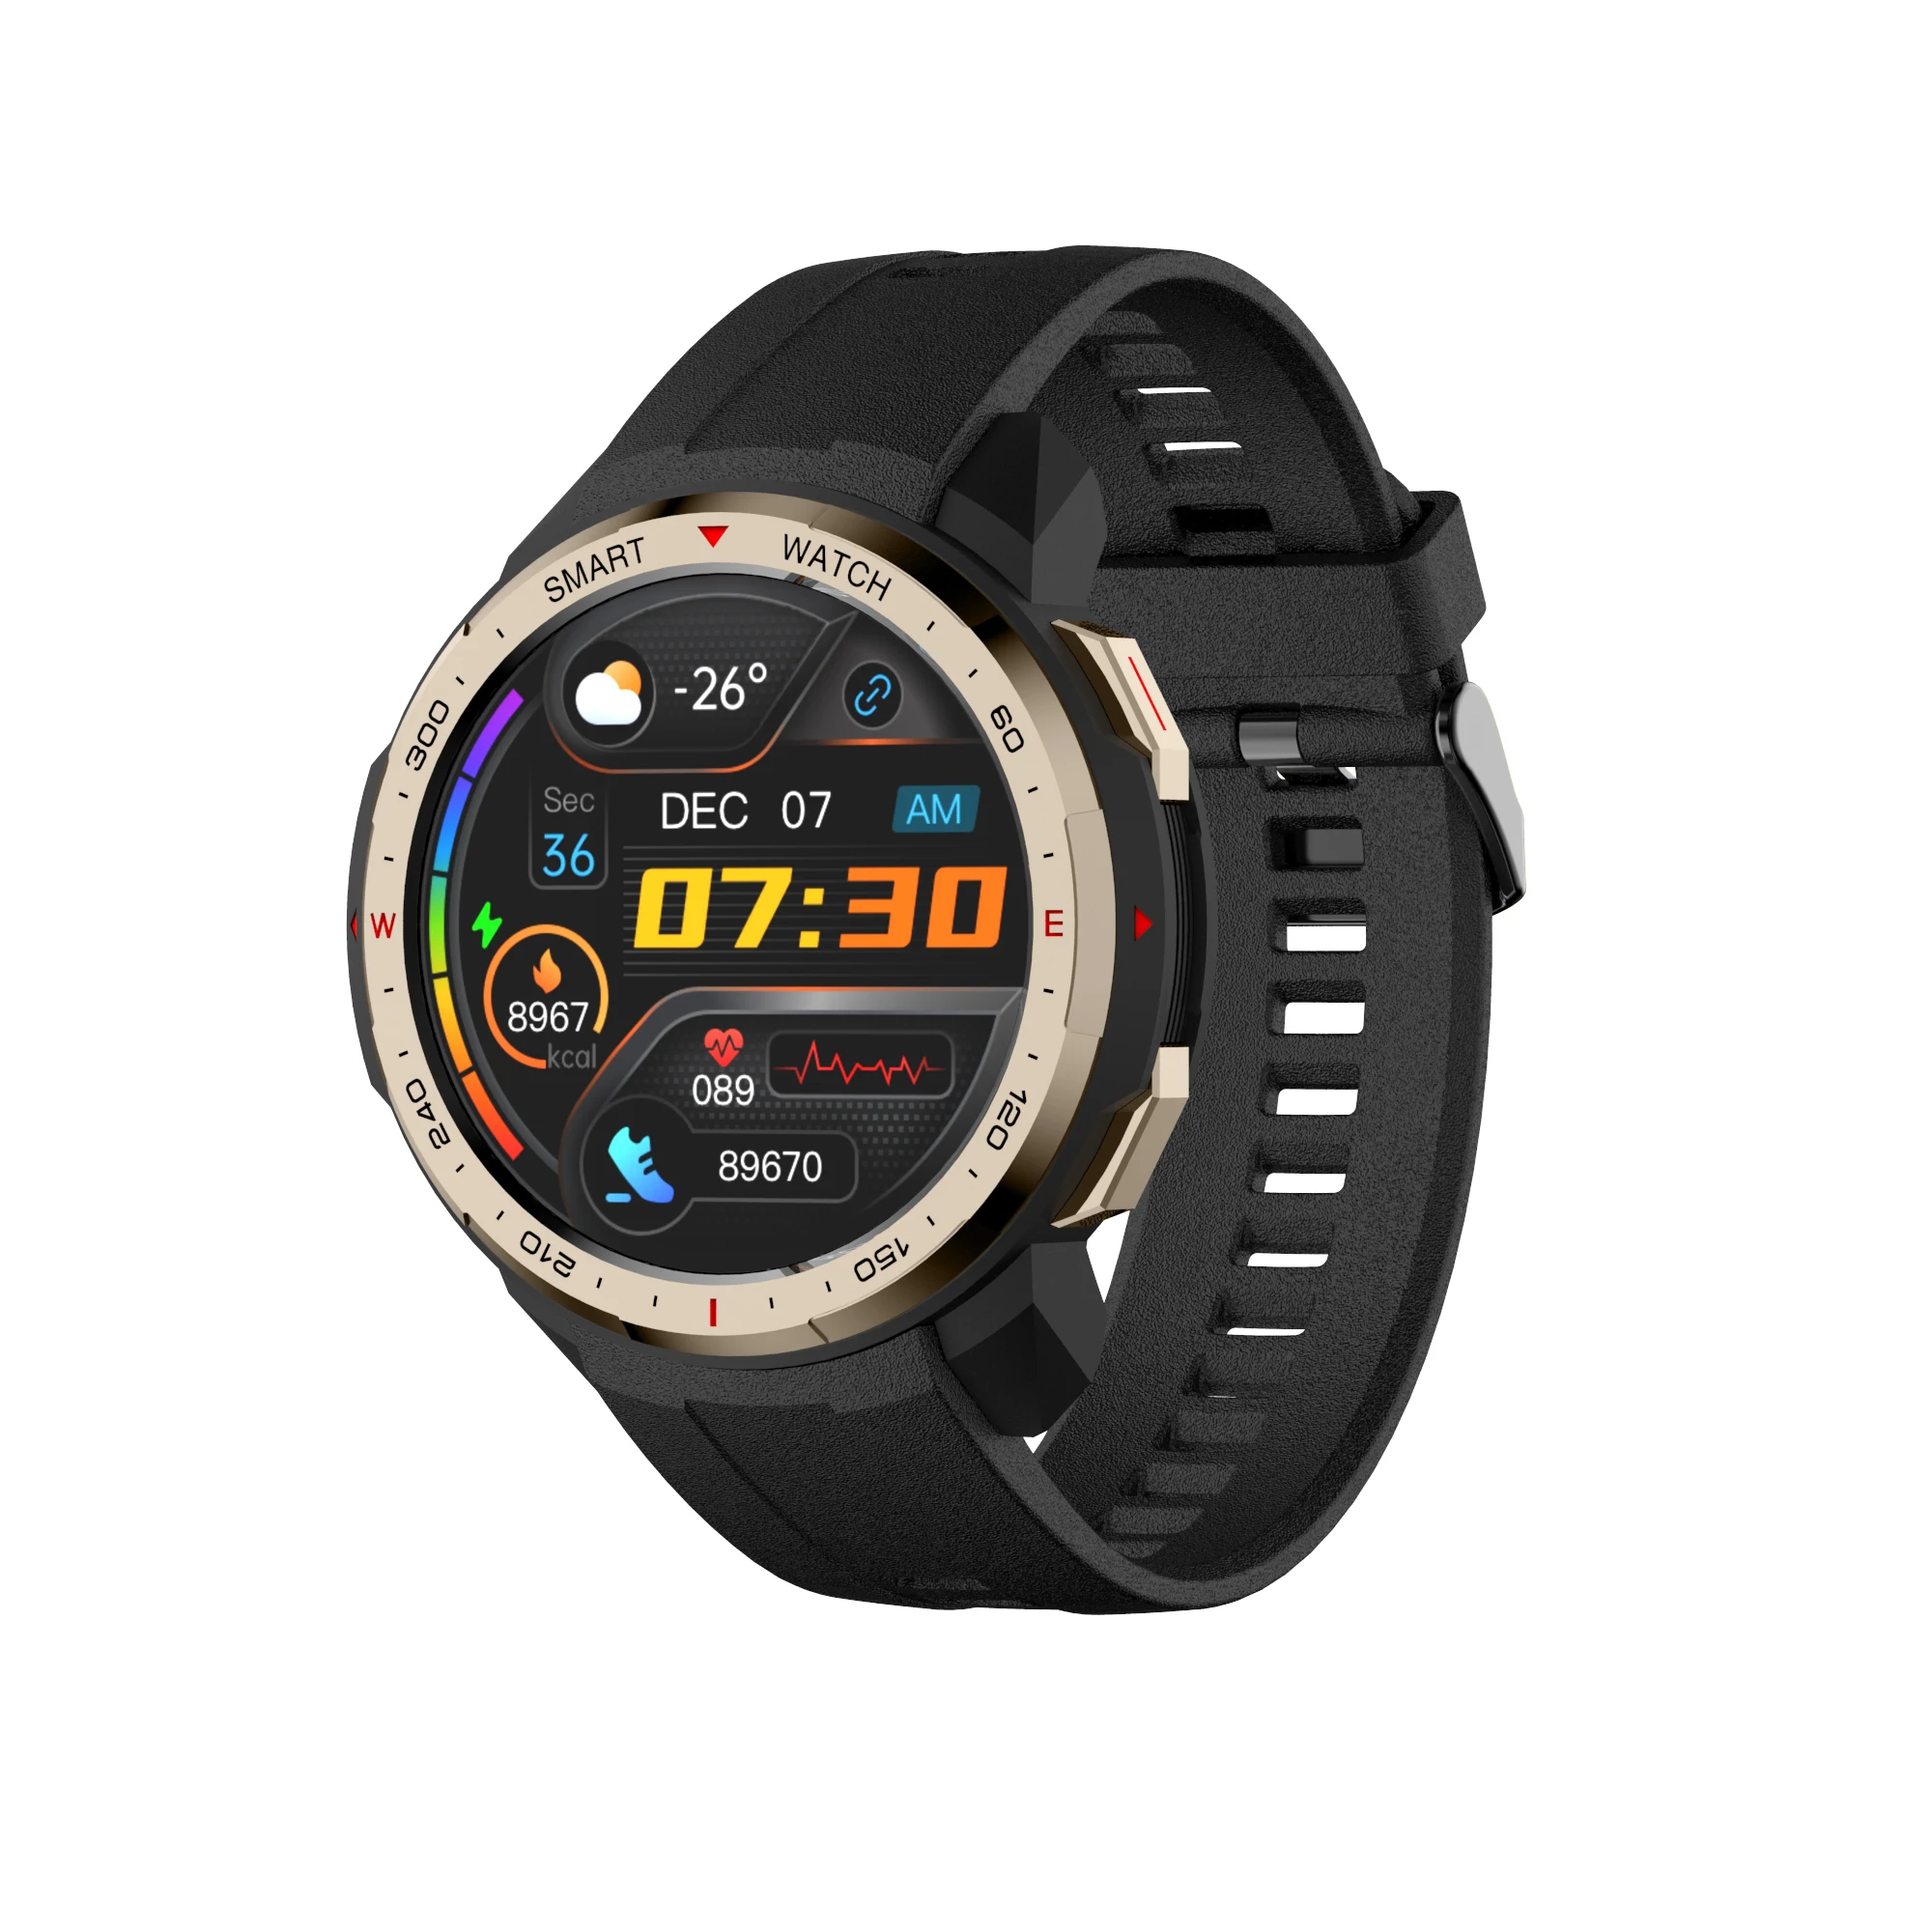 

2022 New Coming MT12 Smart Watch Local Musical Play 8GB Storage 1500 Songs Can be Download Connect to Earphone Sport Smartwatch